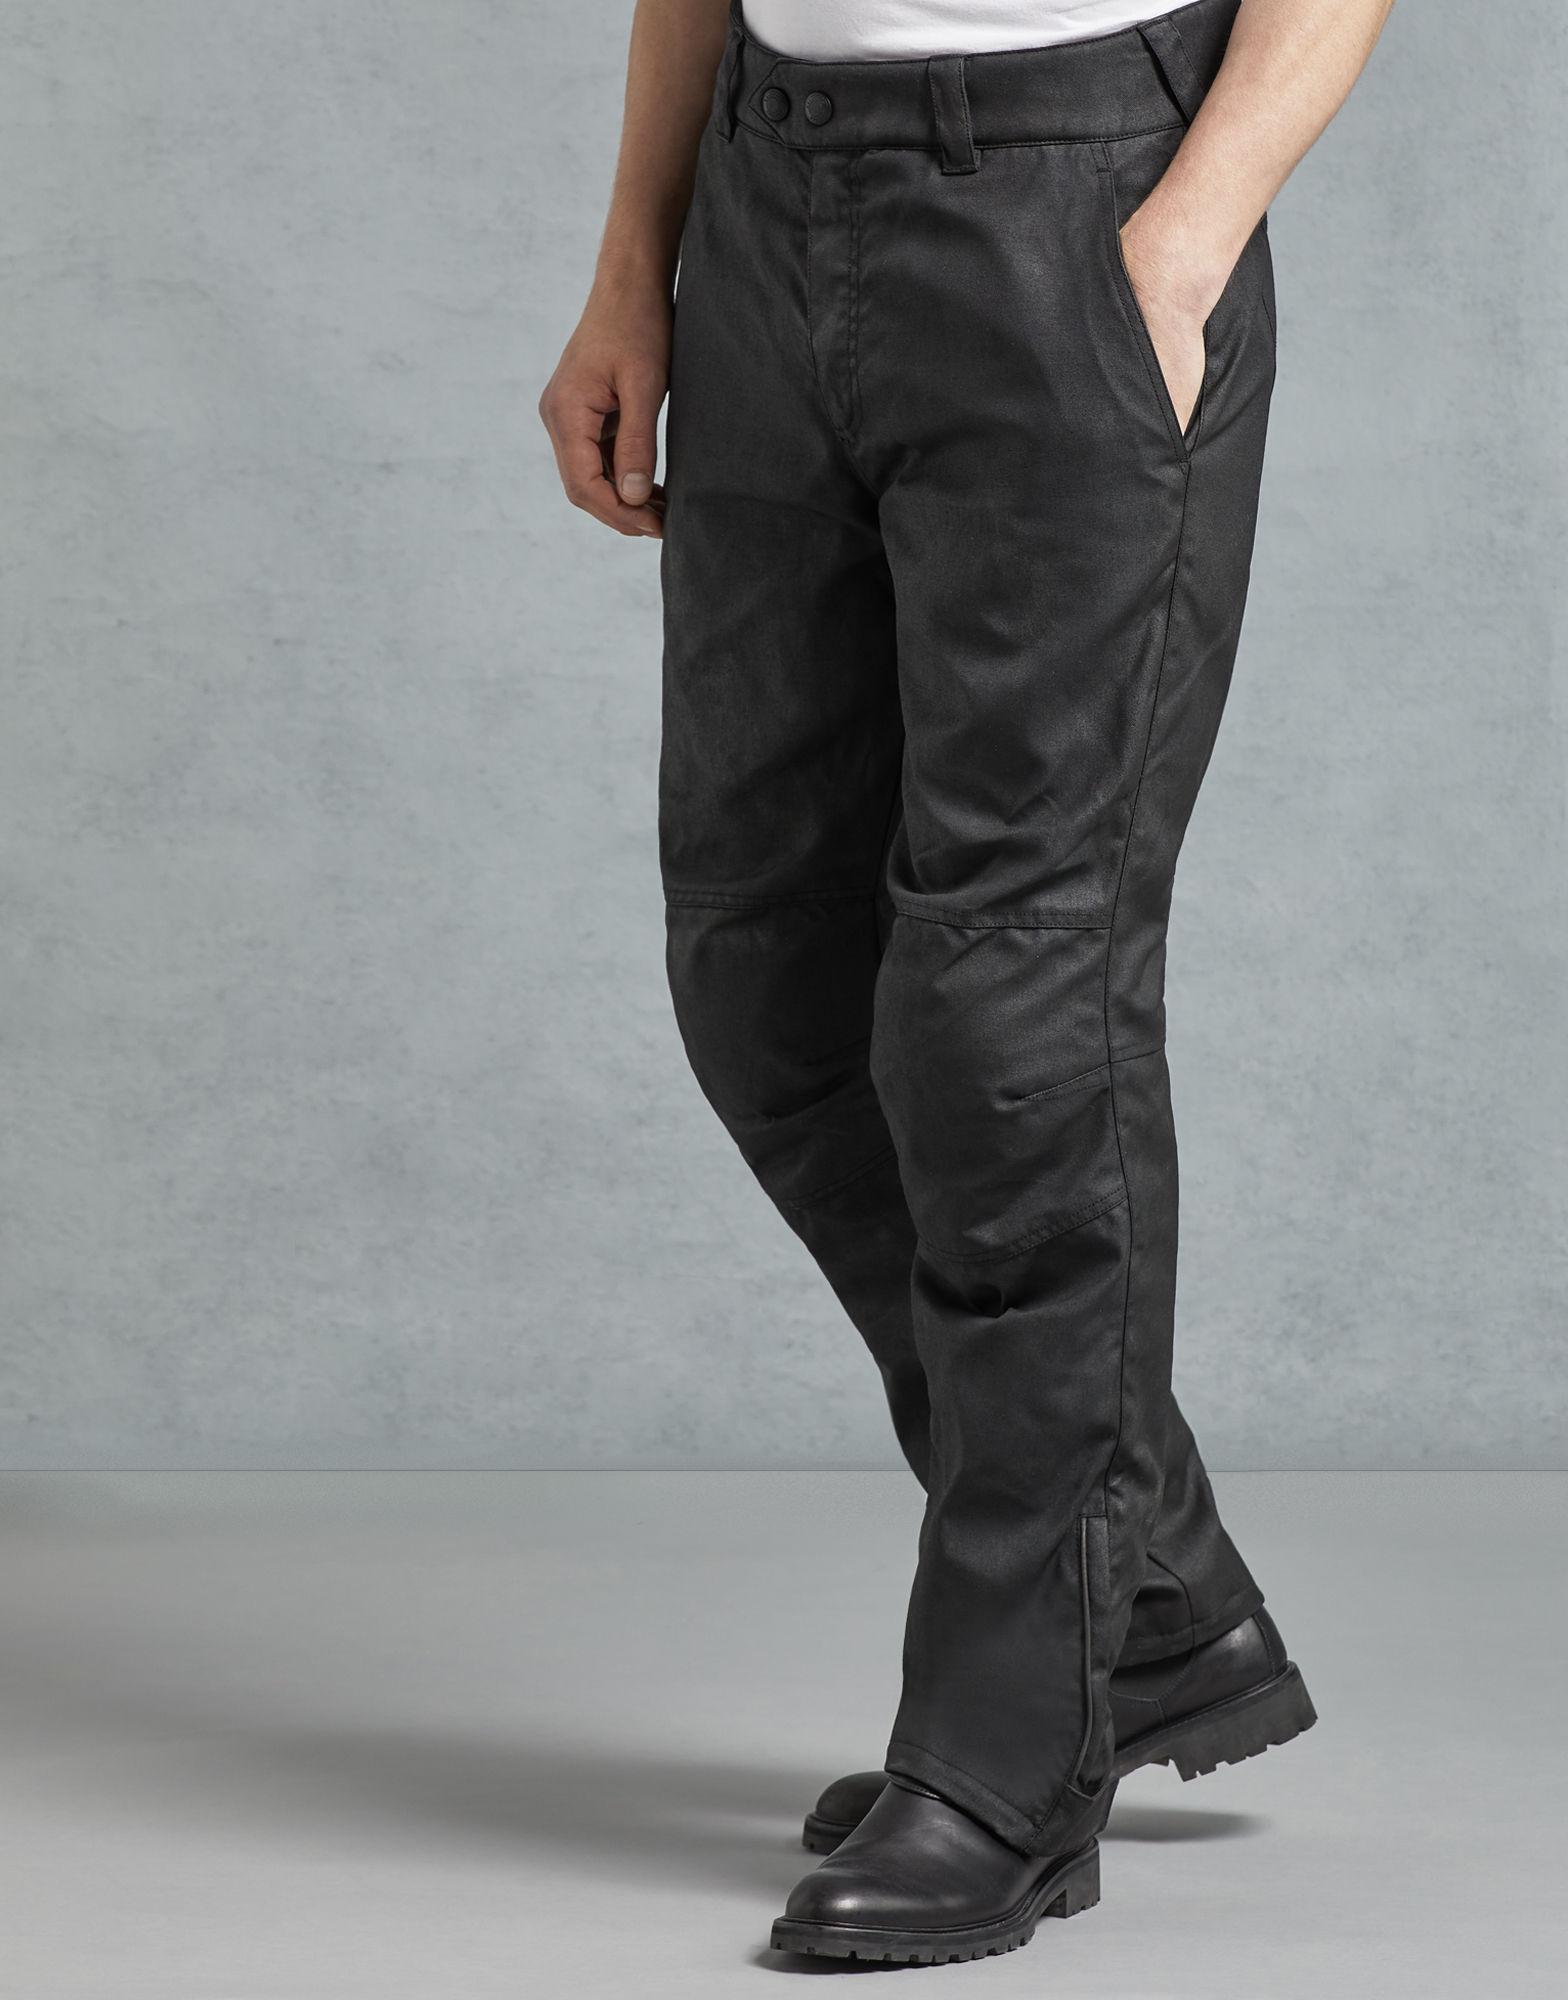 Belstaff Synthetic Snaefell Motorcycle Trousers in Black for Men - Lyst